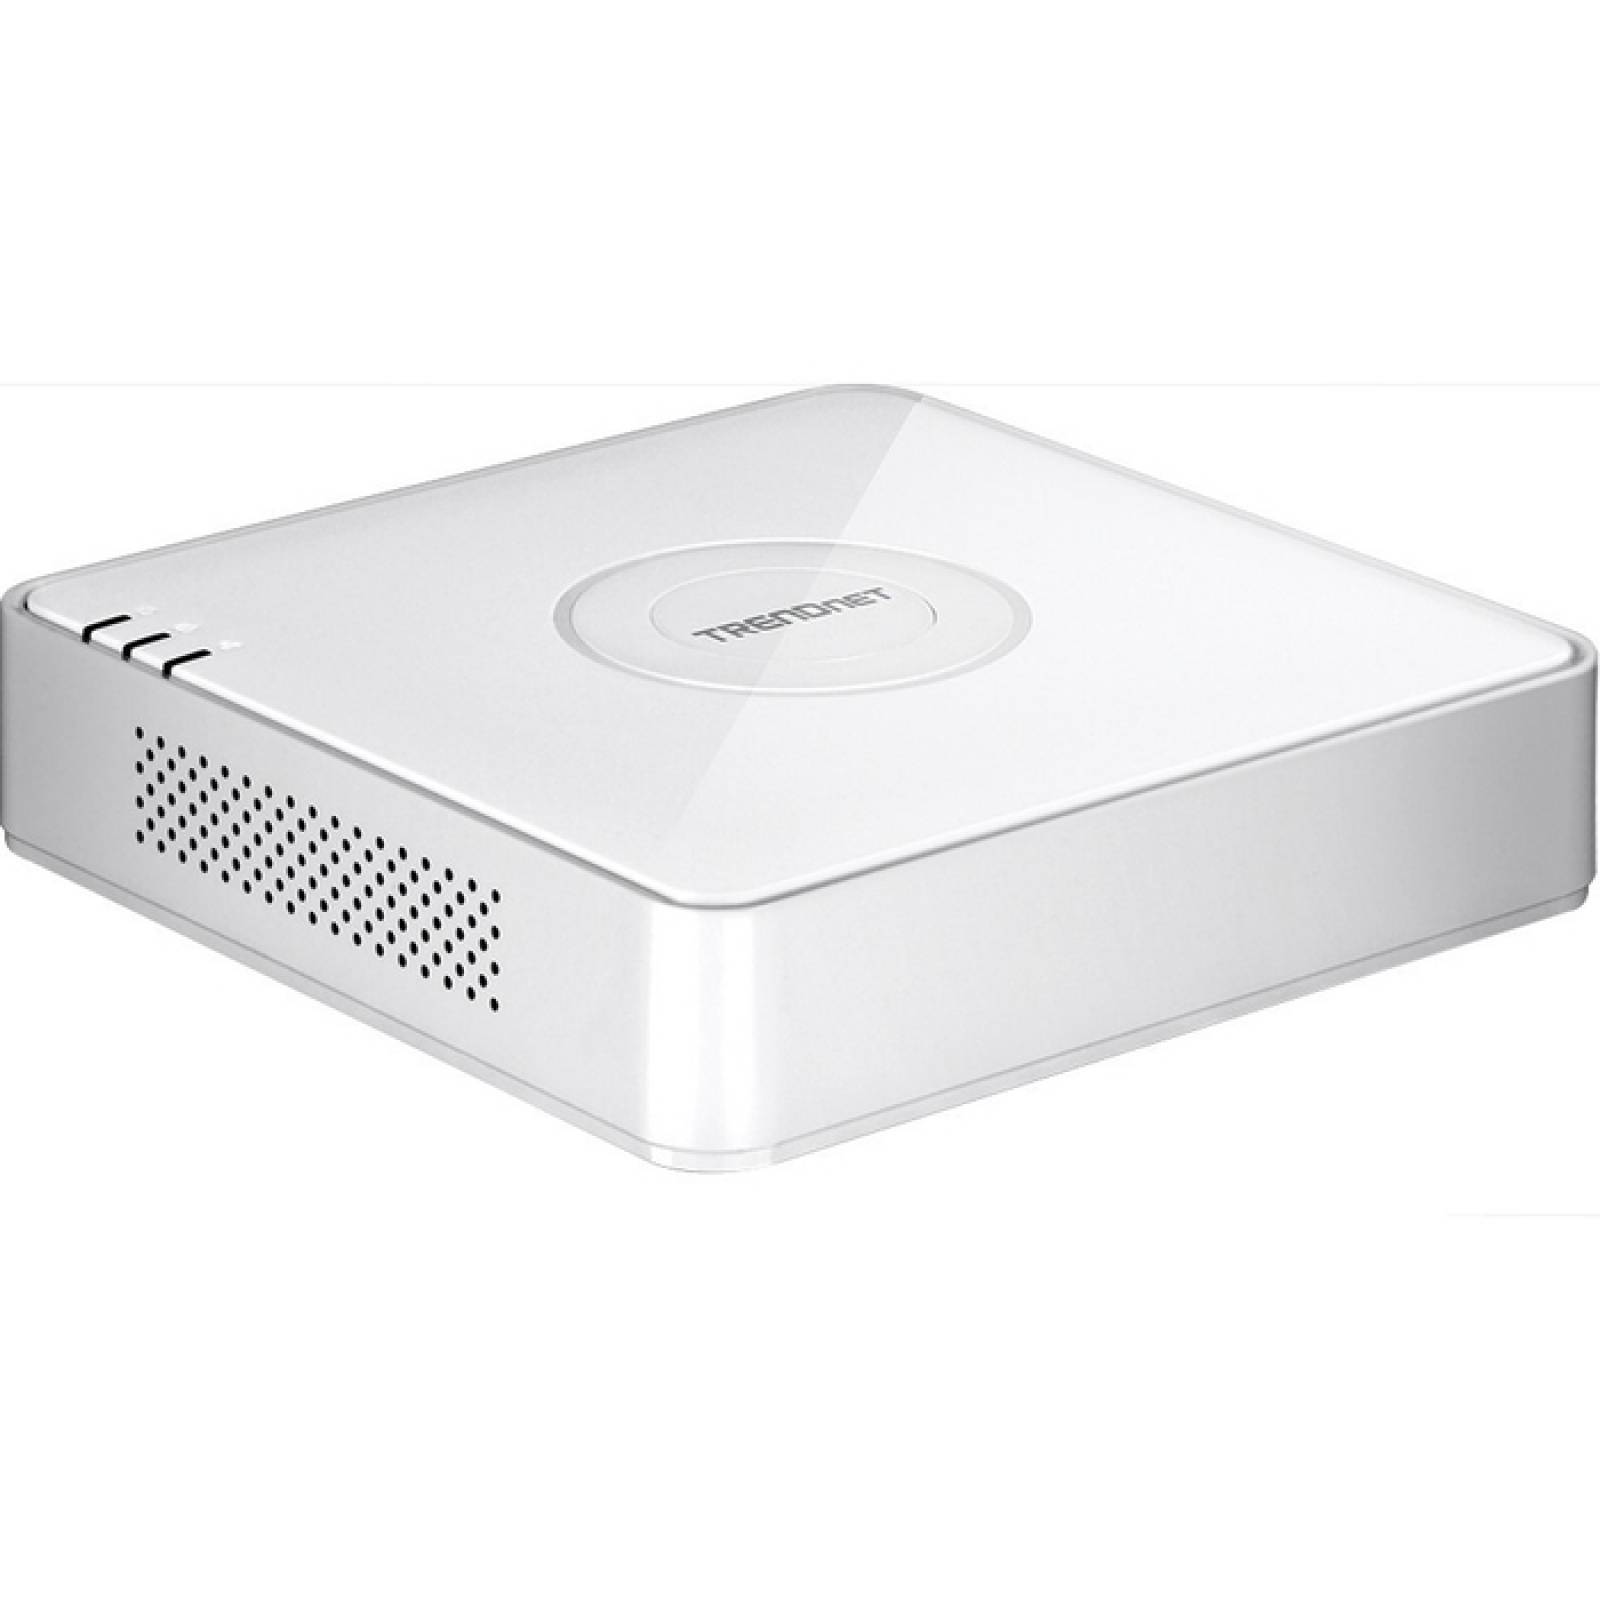 TRENDnet 4 canales 1080p HD PoE NVR